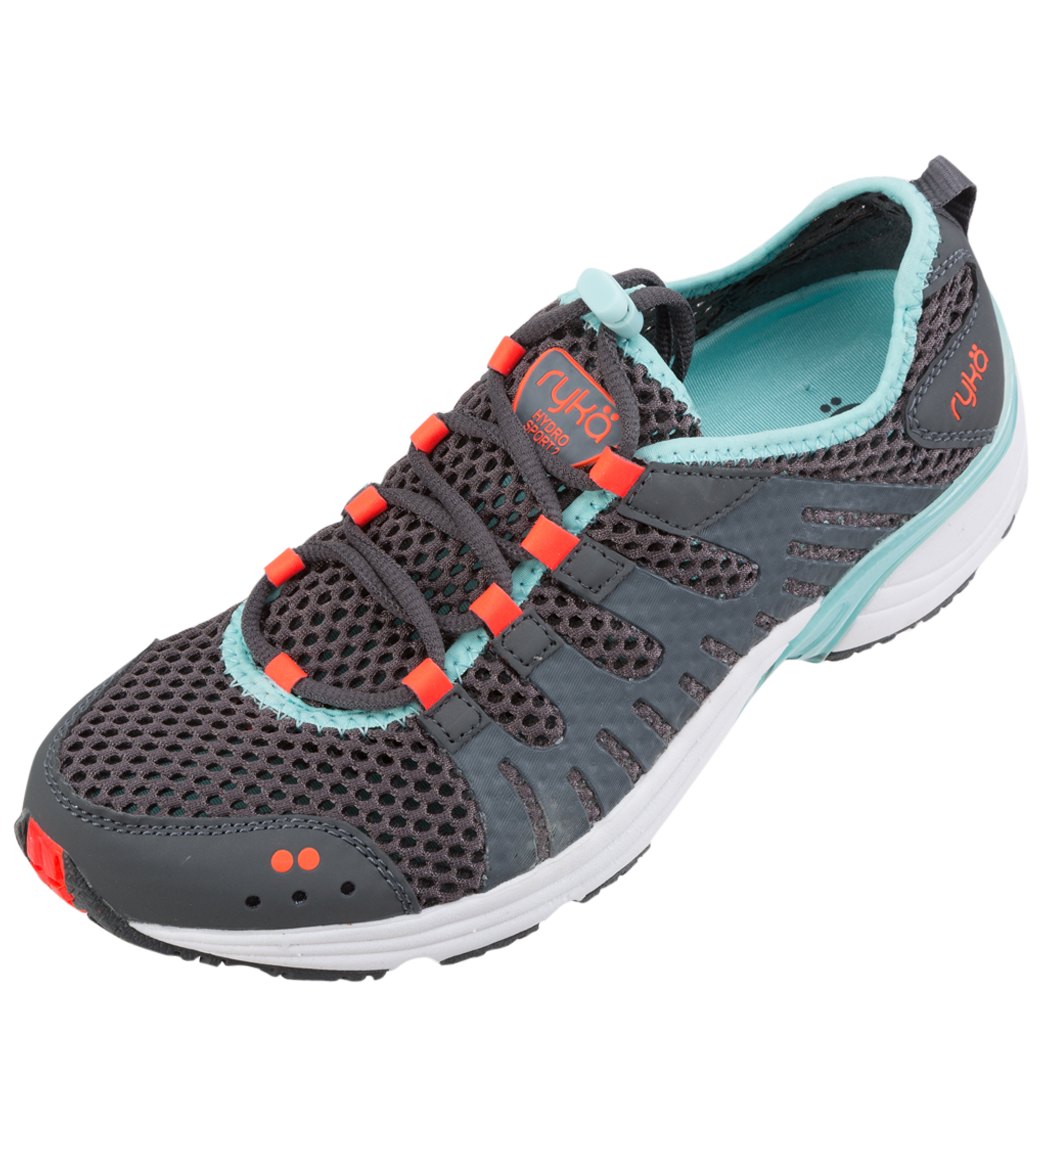 Ryka Women's Hydro Sport 2 Water Shoes at